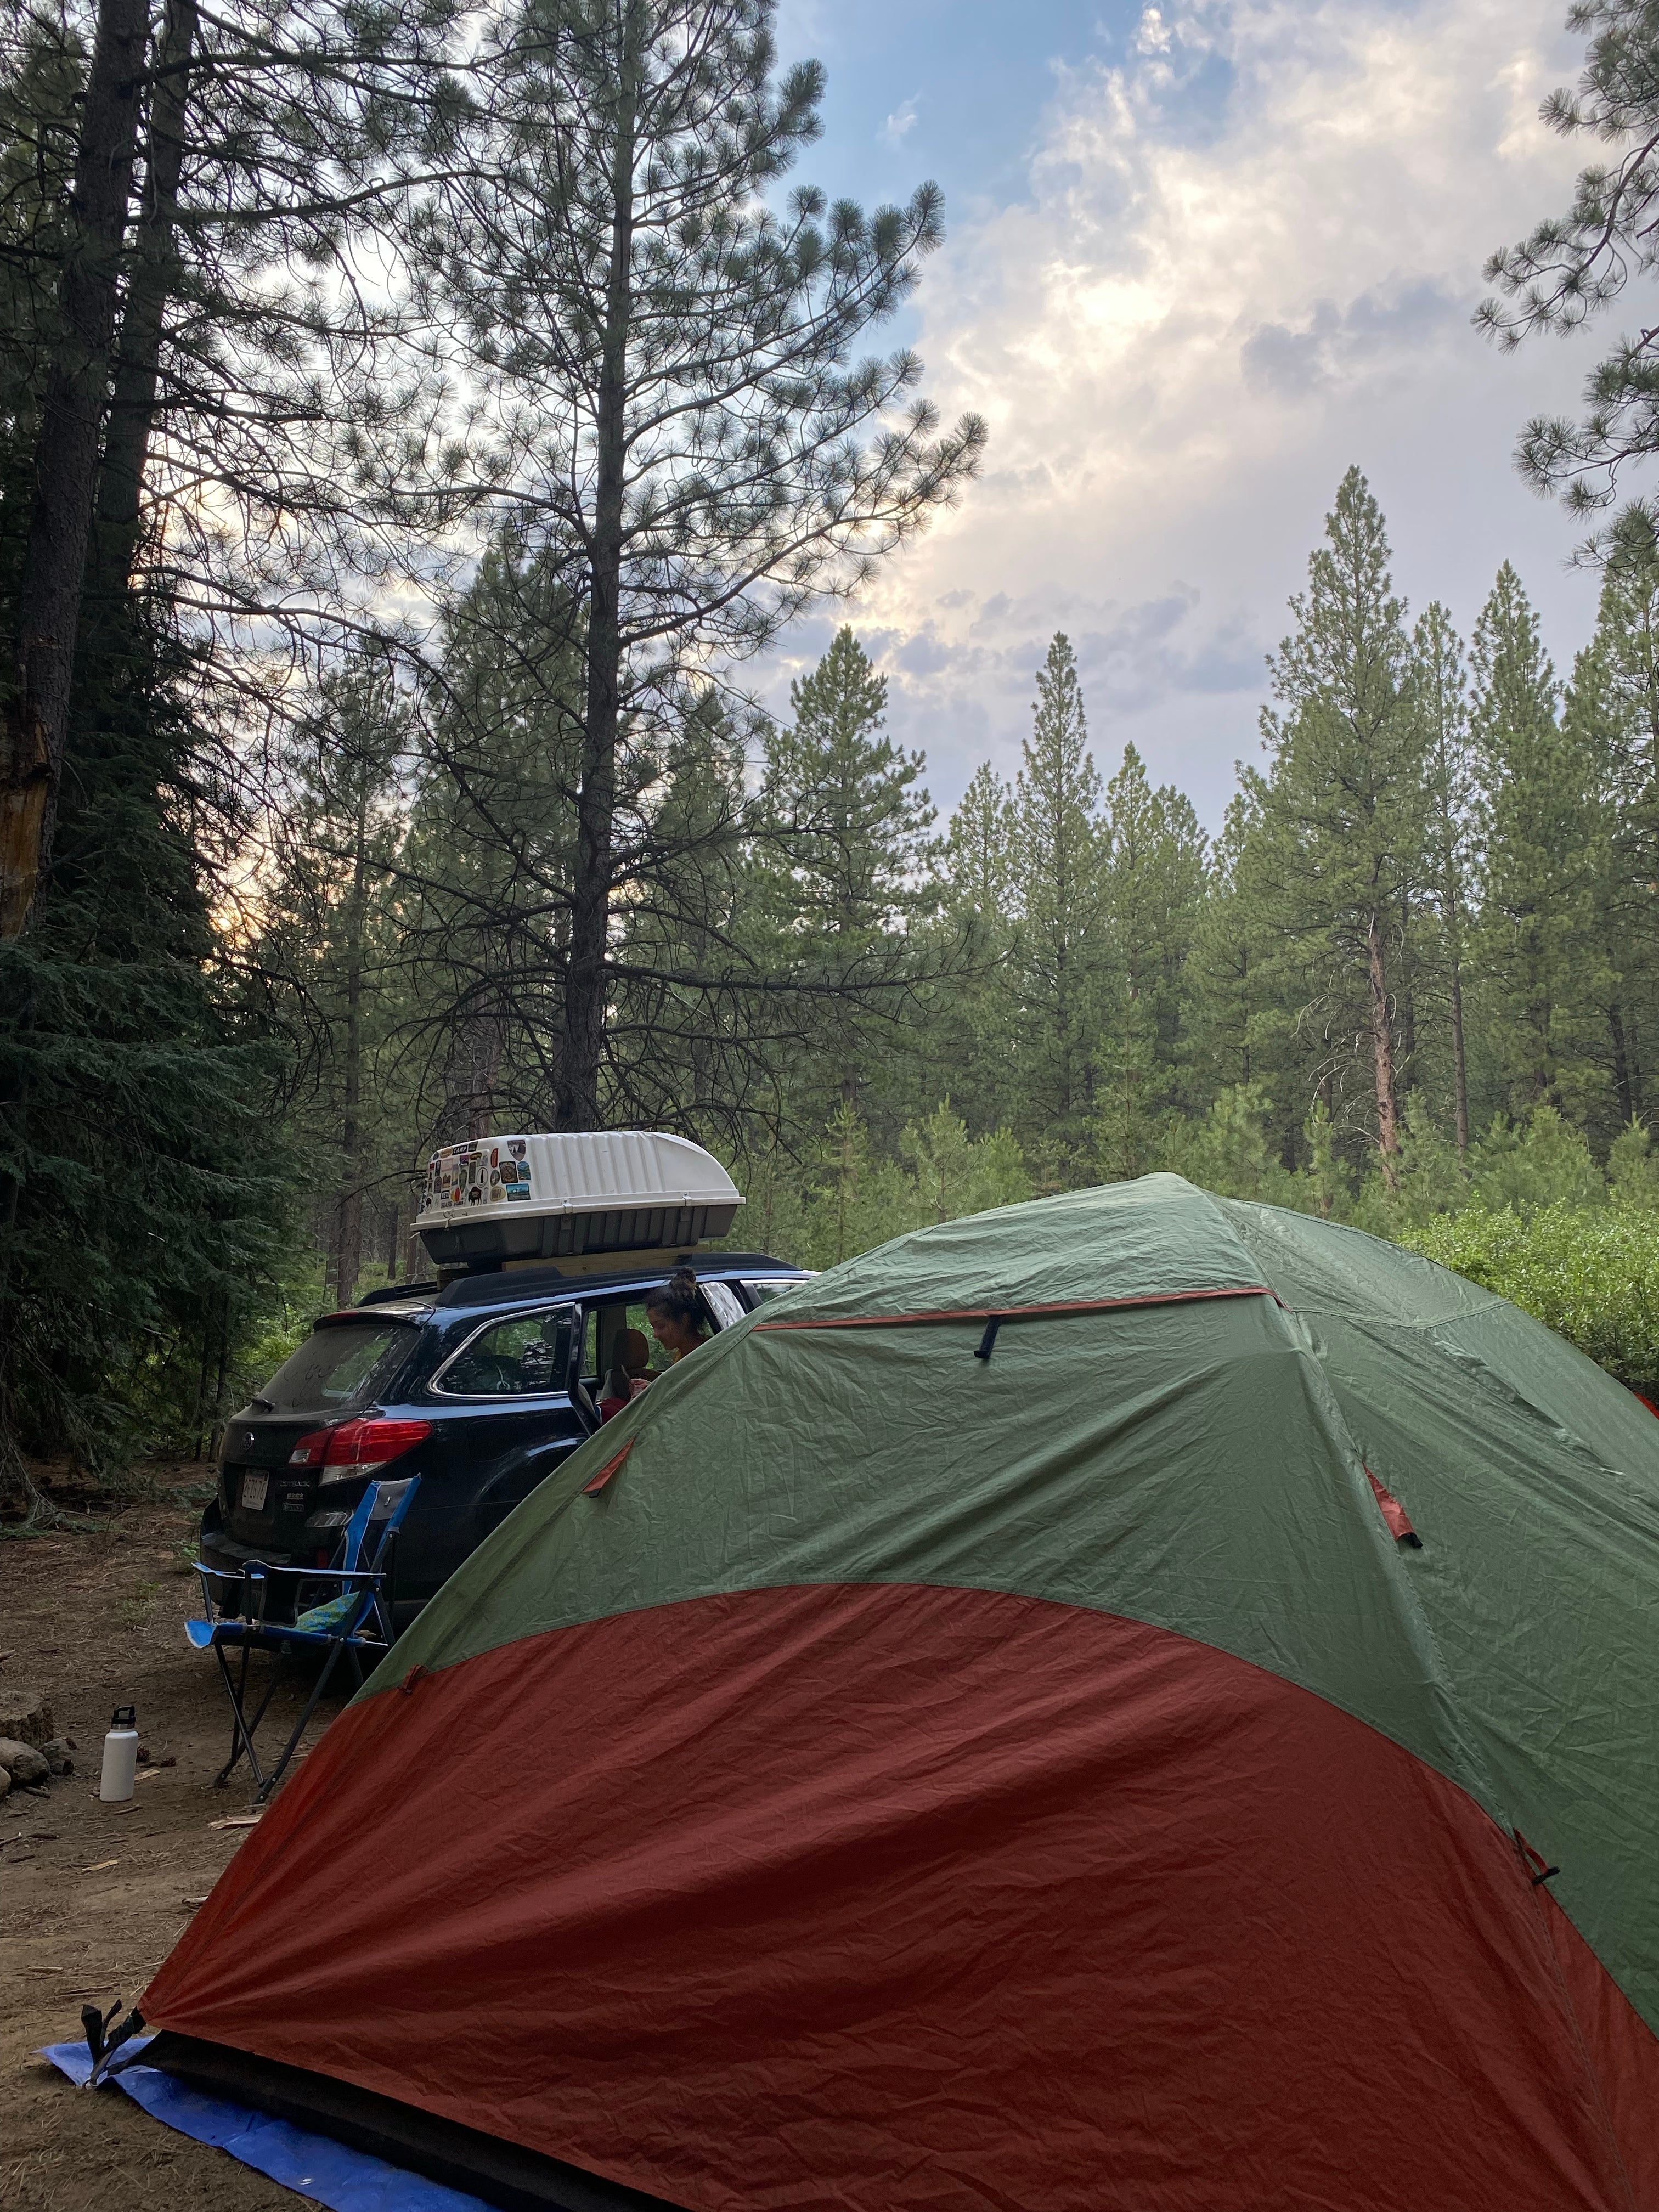 Camper submitted image from NF 4610 Roadside Dispersed Camping - 2